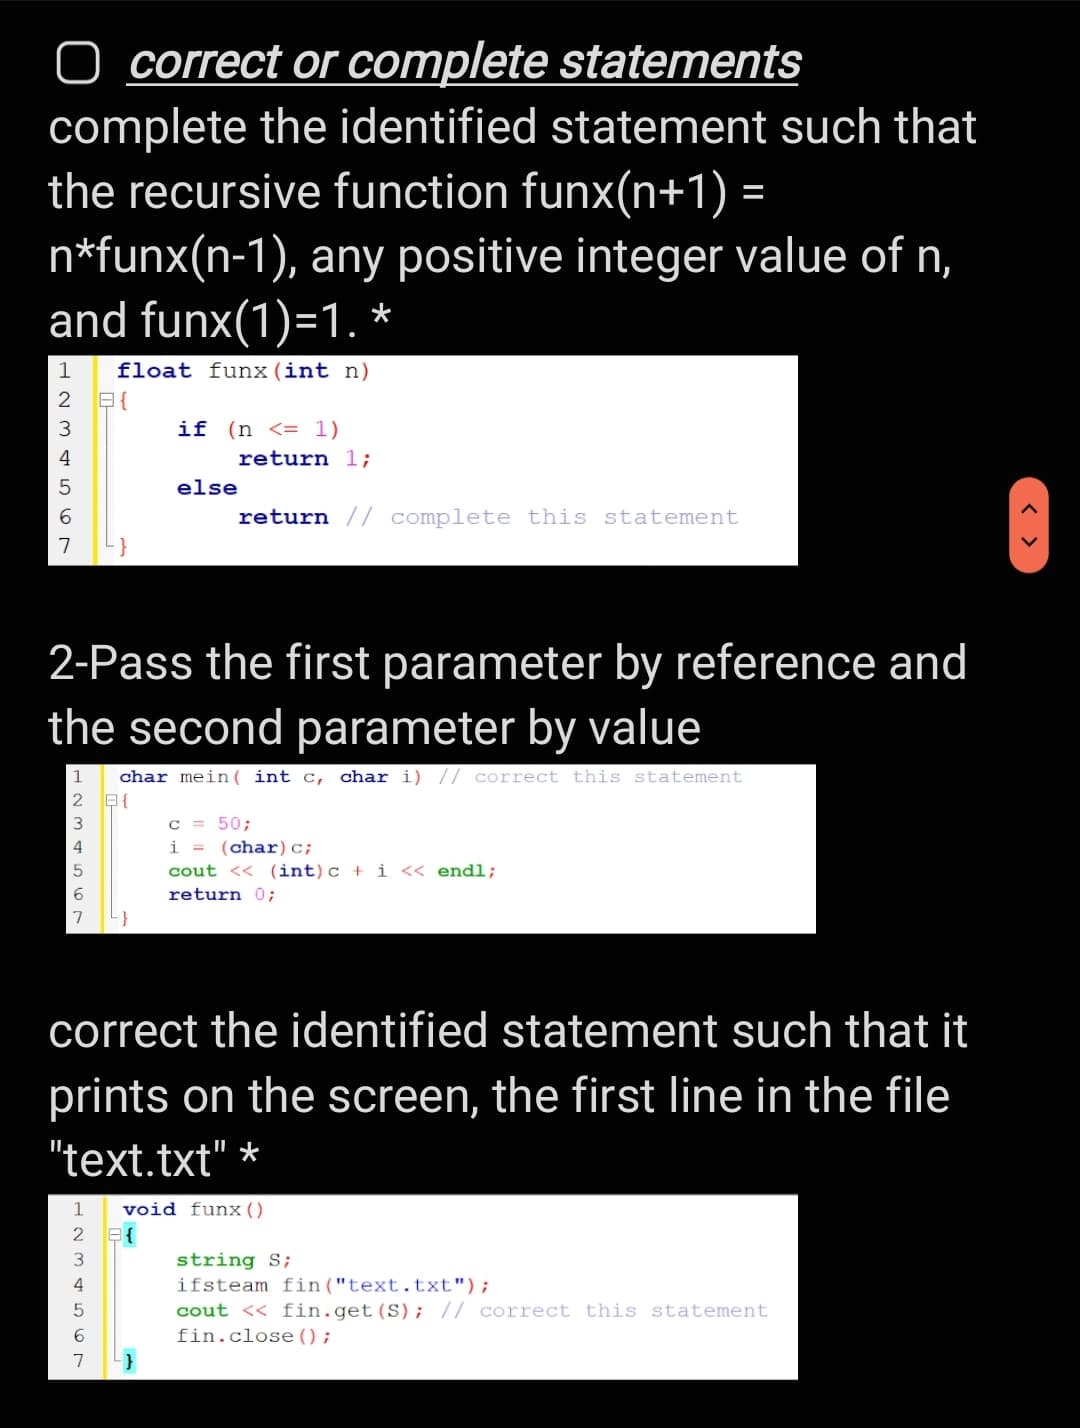 O correct or complete statements
complete the identified statement such that
the recursive function funx(n+1) =
n*funx(n-1), any positive integer value of n,
and funx(1)=1. *
1
float funx(int n)
2 E{
3
if (n <= 1)
4
return 1;
else
return // complete this statement
2-Pass the first parameter by reference and
the second parameter by value
char mein ( int c, char i) // correct this statement
c = 50;
i = (char)c;
cout << (int)c + i << endl;
4
6
return 0;
correct the identified statement such that it
prints on the screen, the first line in the file
"text.txt" *
1
void funx ()
E{
3
string S;
4
ifsteam fin("text.txt");
cout << fin.get(S); |/ correct this statement
fin.close ();
5
7
< >
